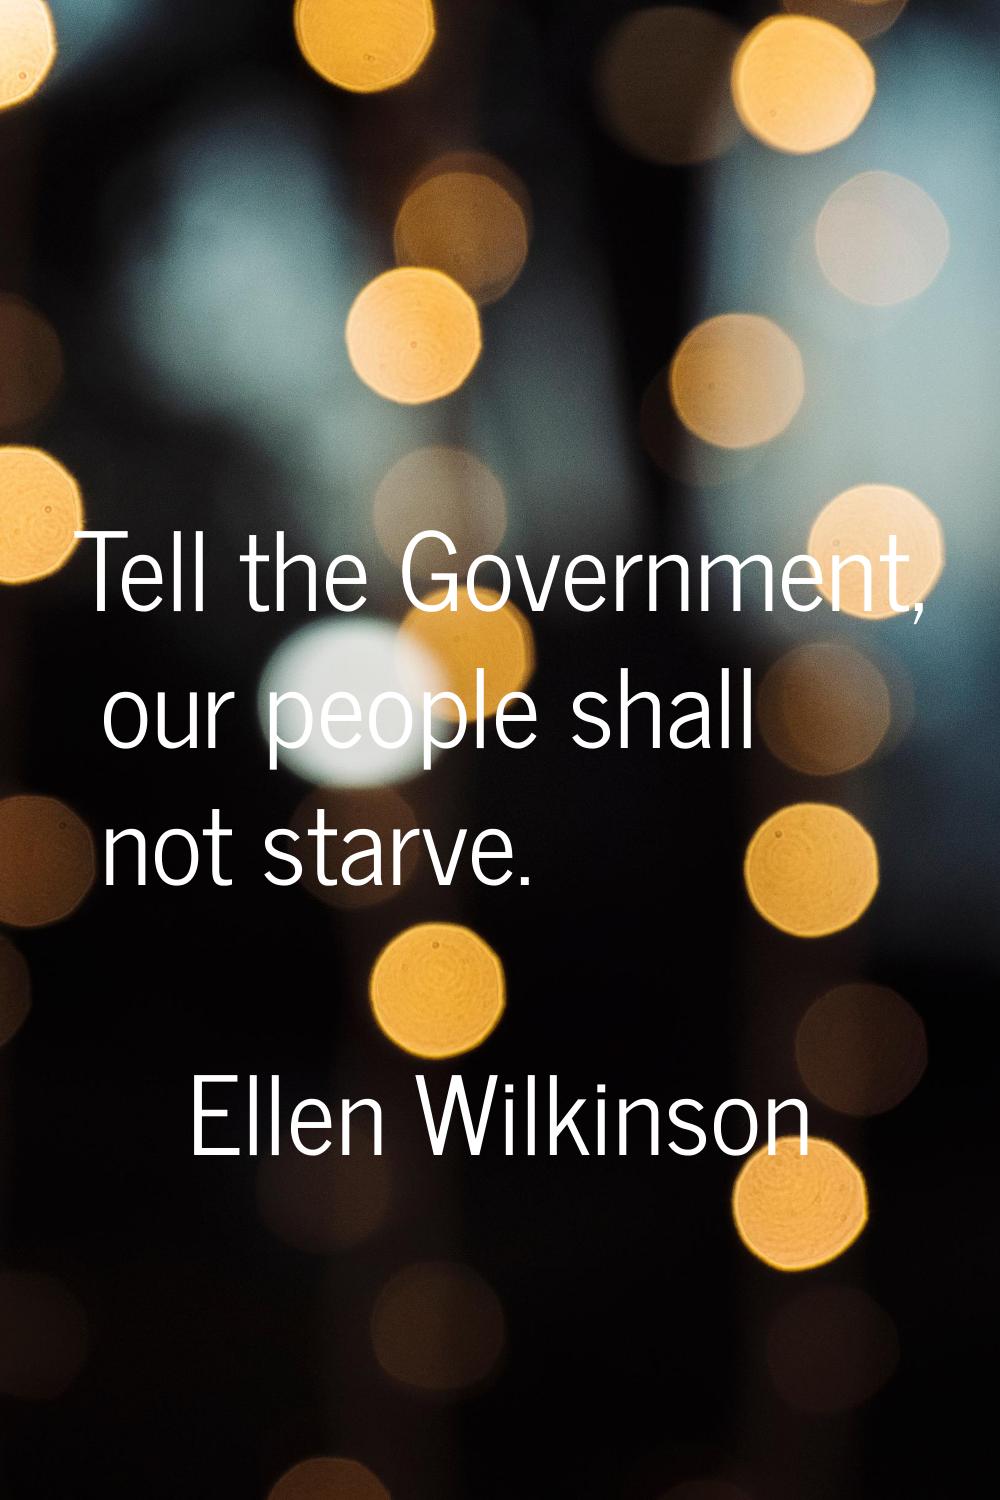 Tell the Government, our people shall not starve.